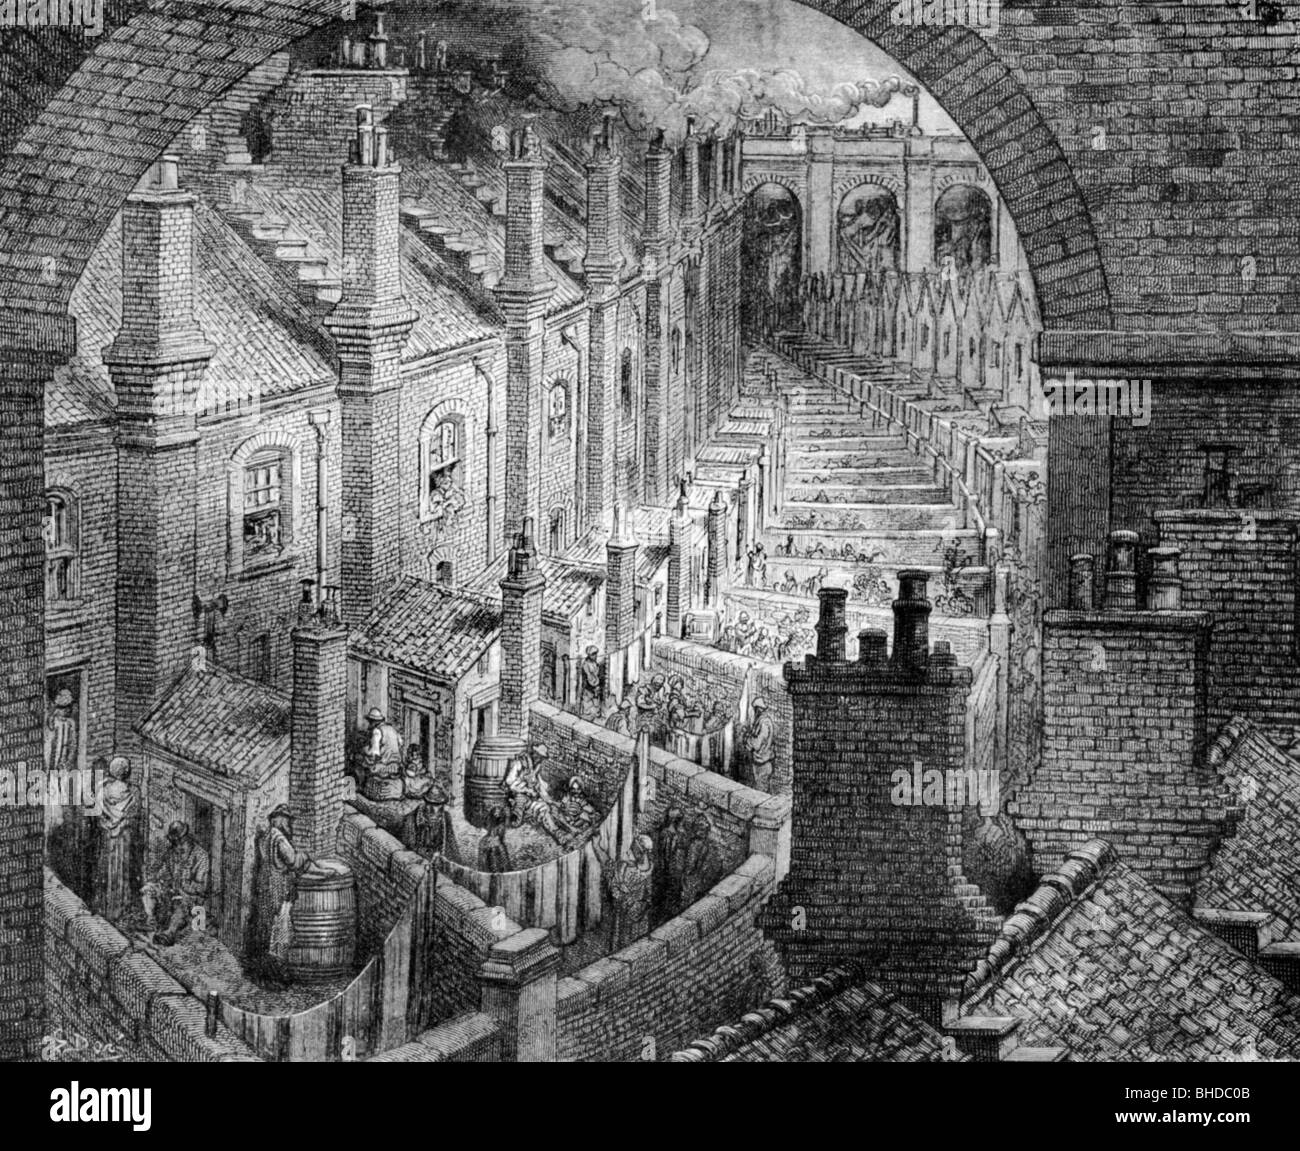 geography / travel, Great Britain, London, flats of working class, drawing by Gustave Dore, mid 19th century, historic, historical, slum, slums, misery, adversity, poverty, labour force, workforce, working classes, organized labour, workmanship, settlement, settlements, capital, metropolis, behemoth, industrialization, industrialisation, quarter, district /dist./, districts, chimney, smokestack, chimneys, smokestacks, Western Europe, backyard, backyards, England, Artist's Copyright has not to be cleared Stock Photo